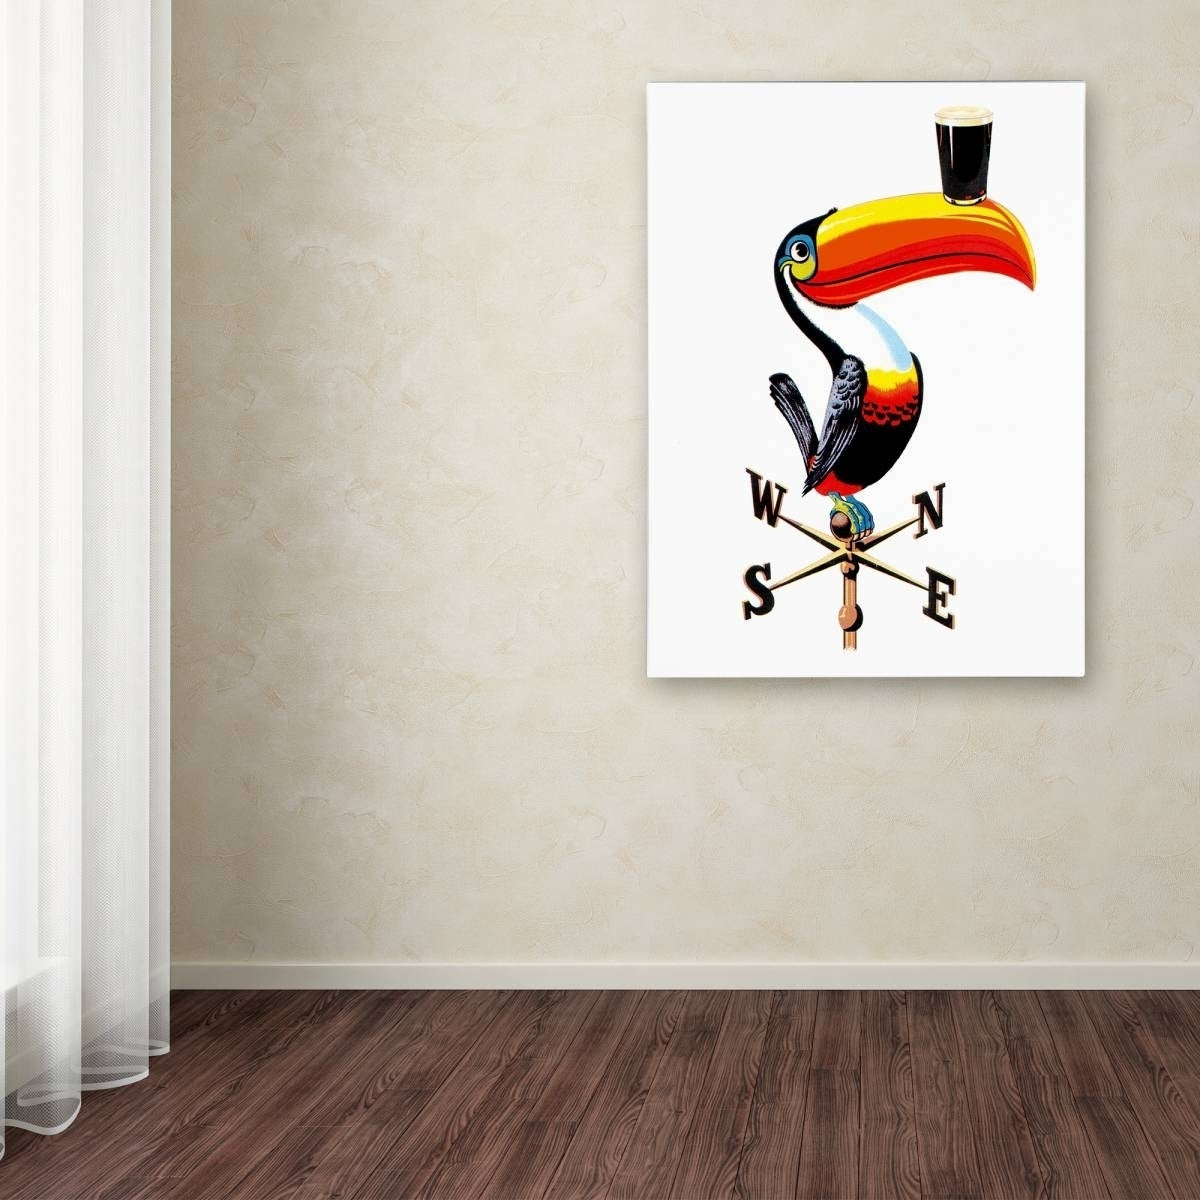 A Guinness Brewery 'Guinness V' Canvas Art print of a toucan on a wall.